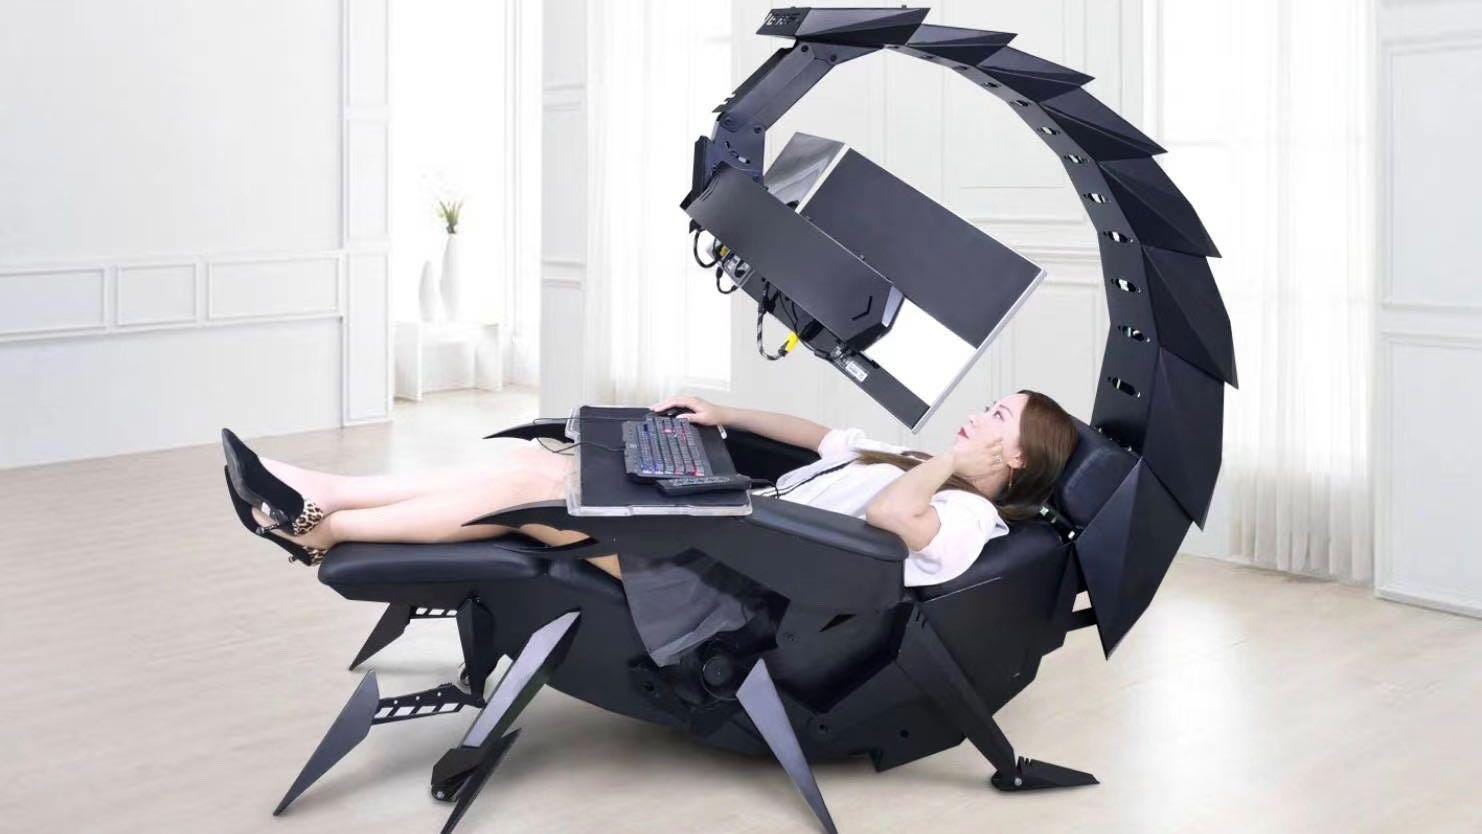 This Giant Scorpion Is Really A Zero Gravity Gaming Chair And Computer Workstation Cnet